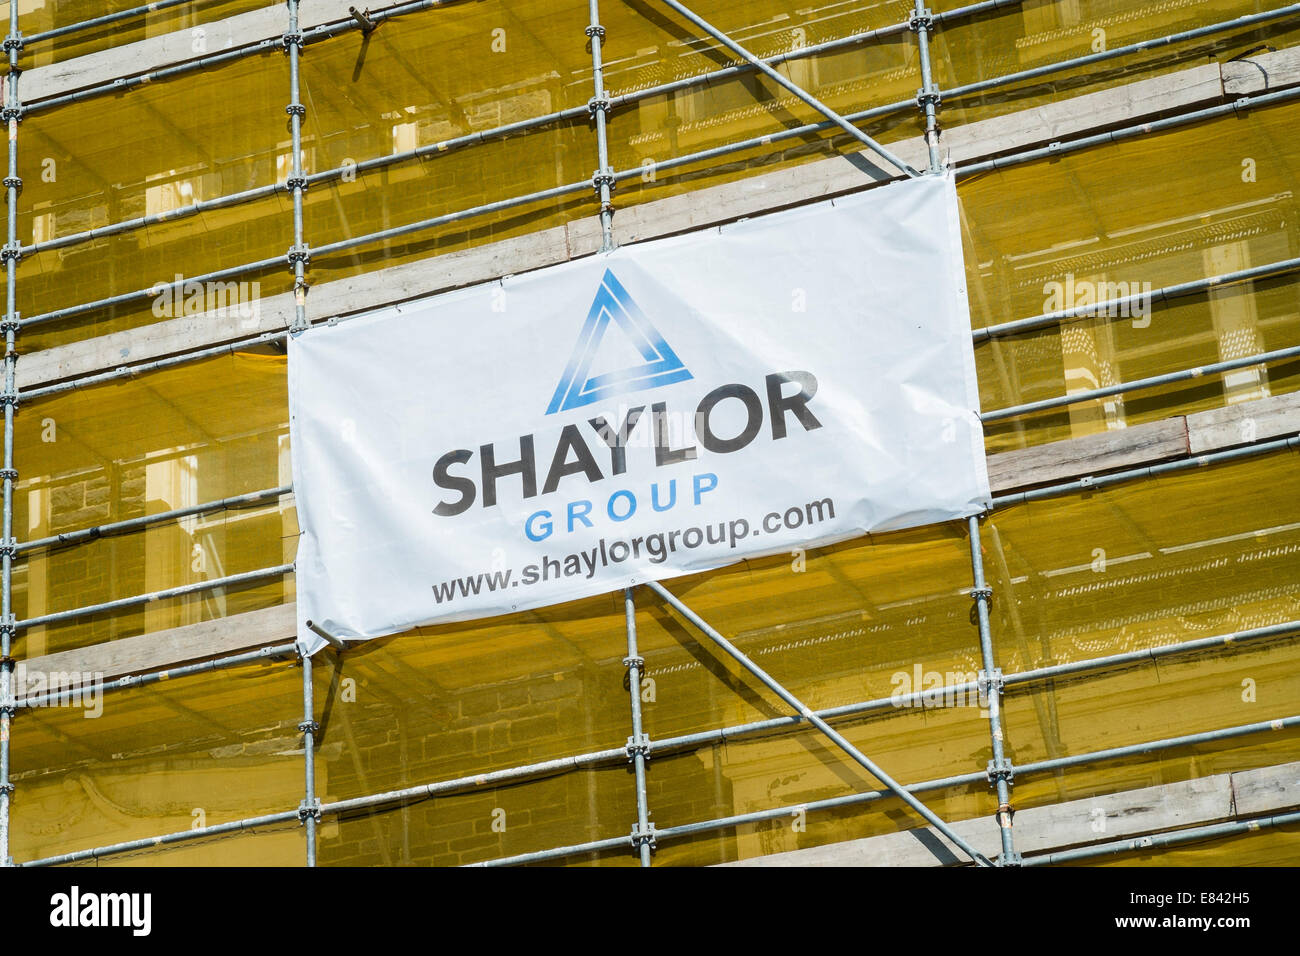 Scaffolding on property and logo banner for Shaylor group construction building refurbishment contractors  company firm UK Stock Photo